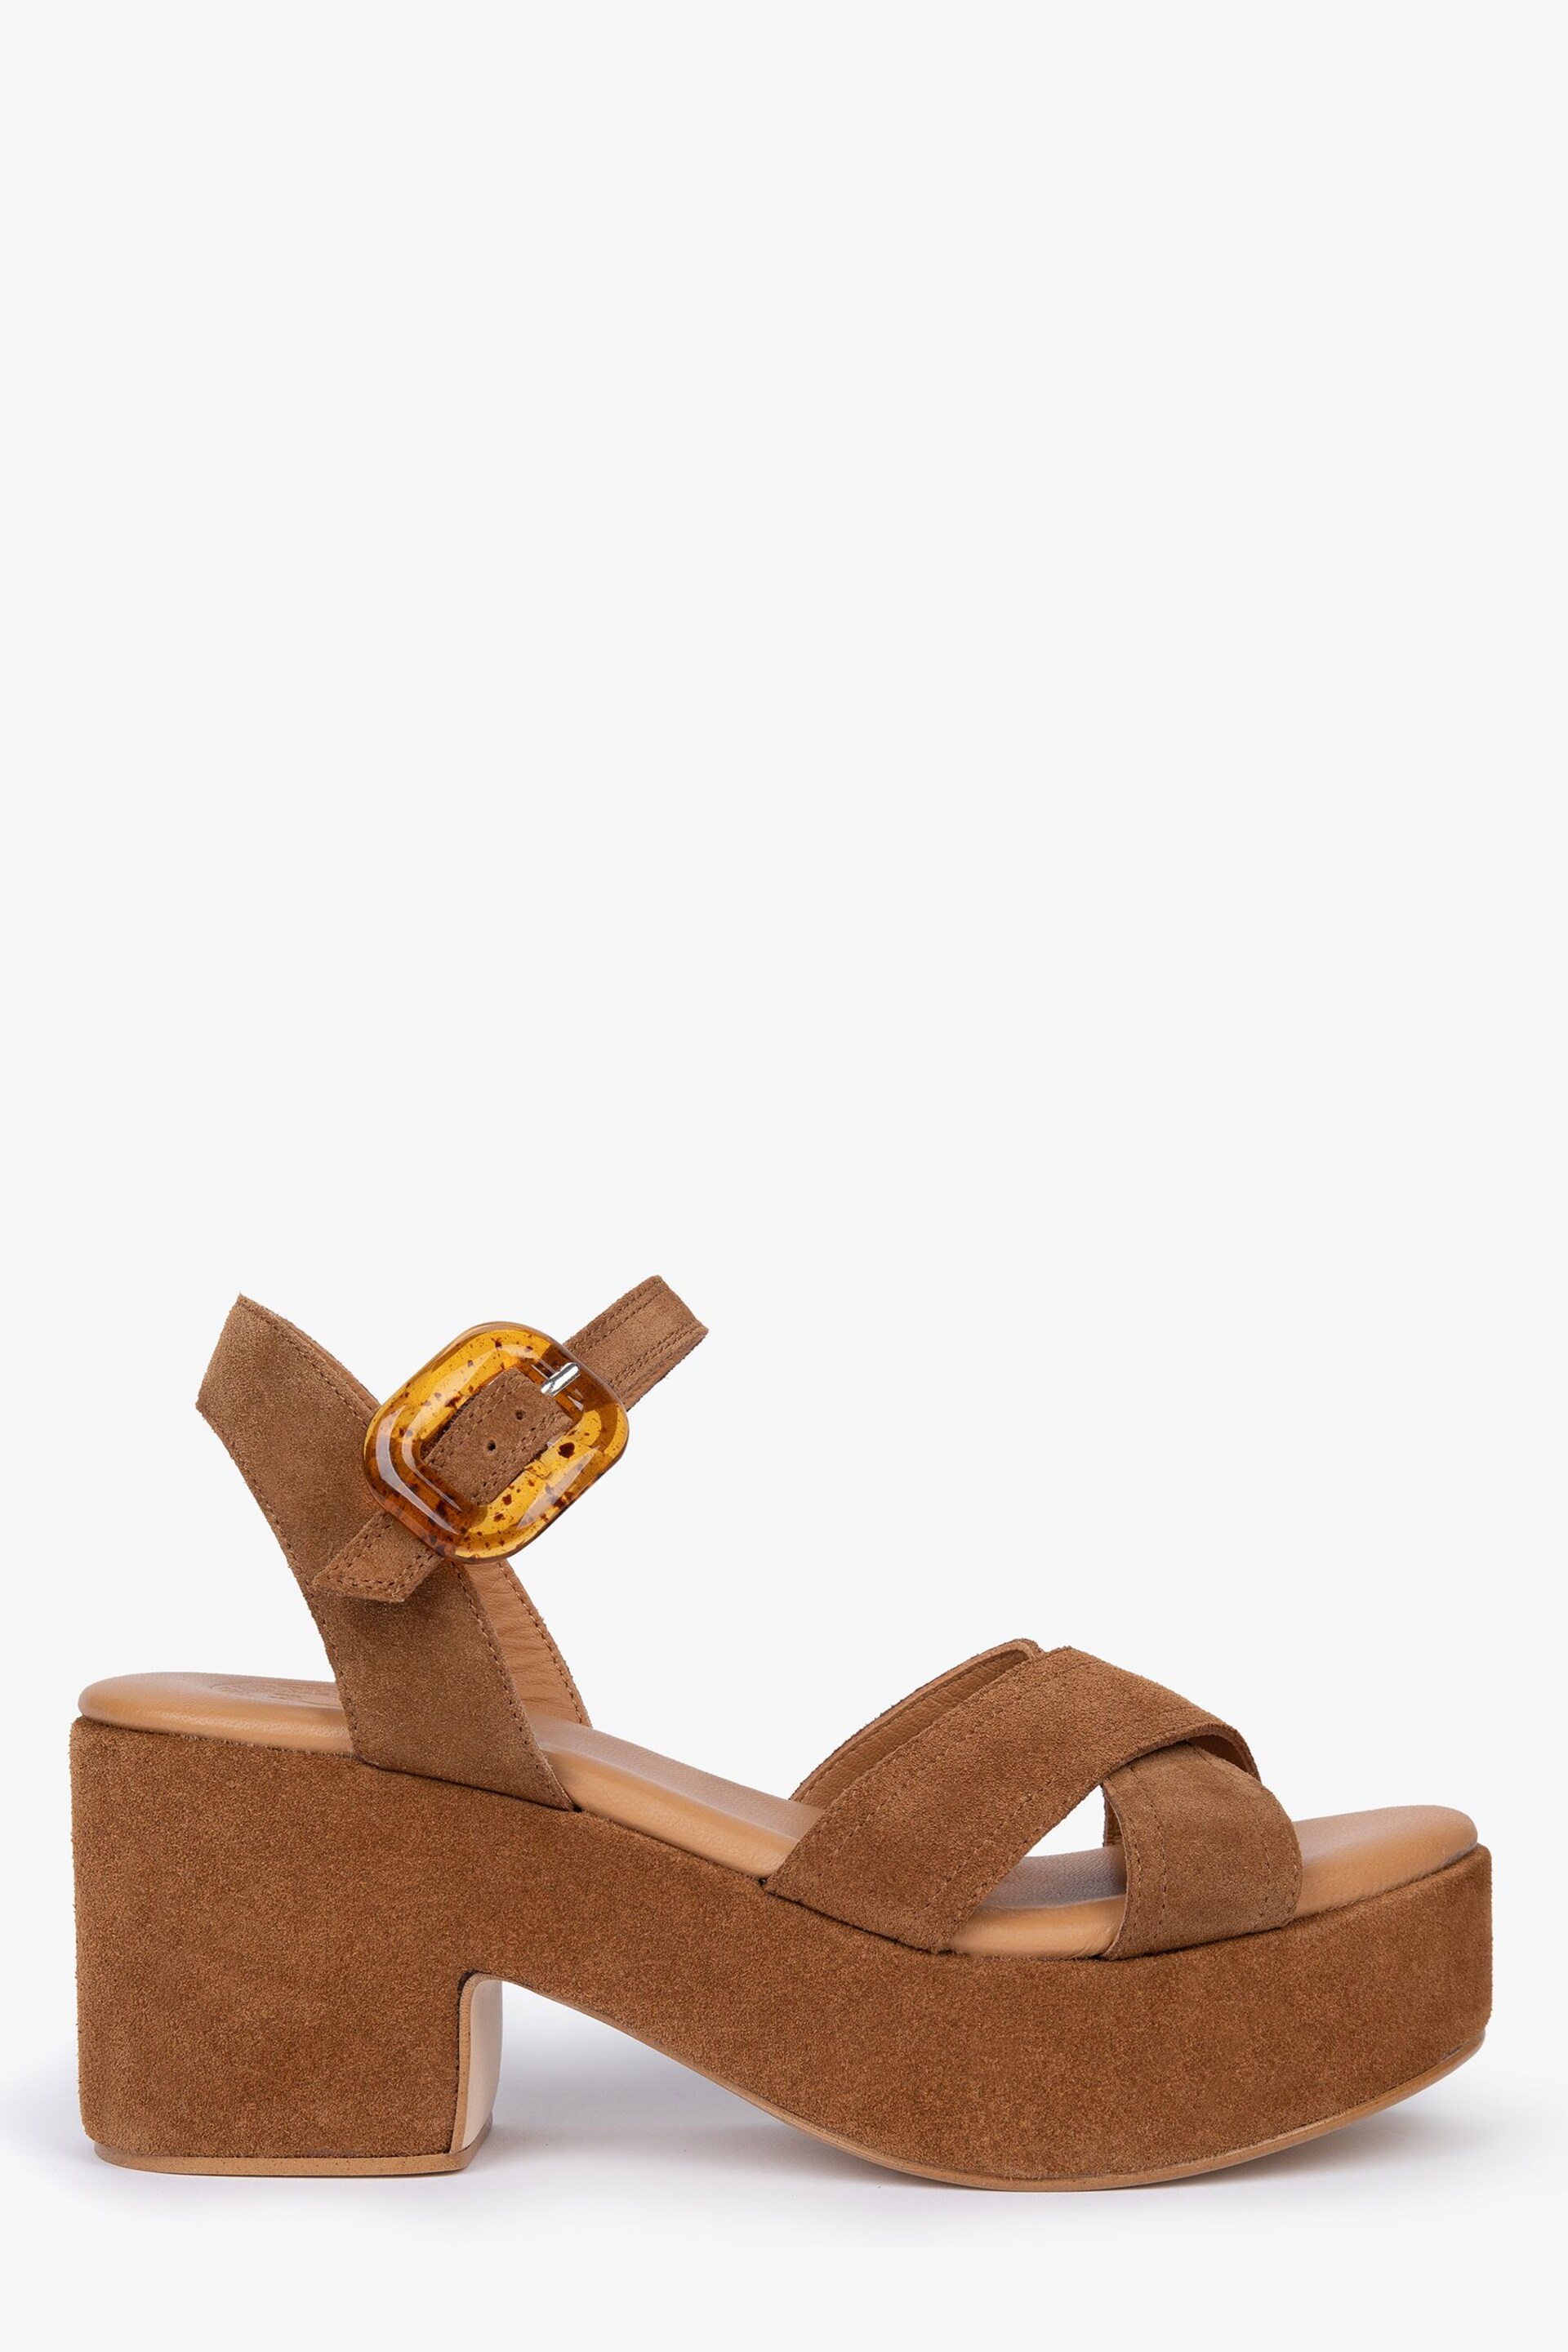 Penelope Chilvers Bella Suede Brown Sandals - Image 2 of 5